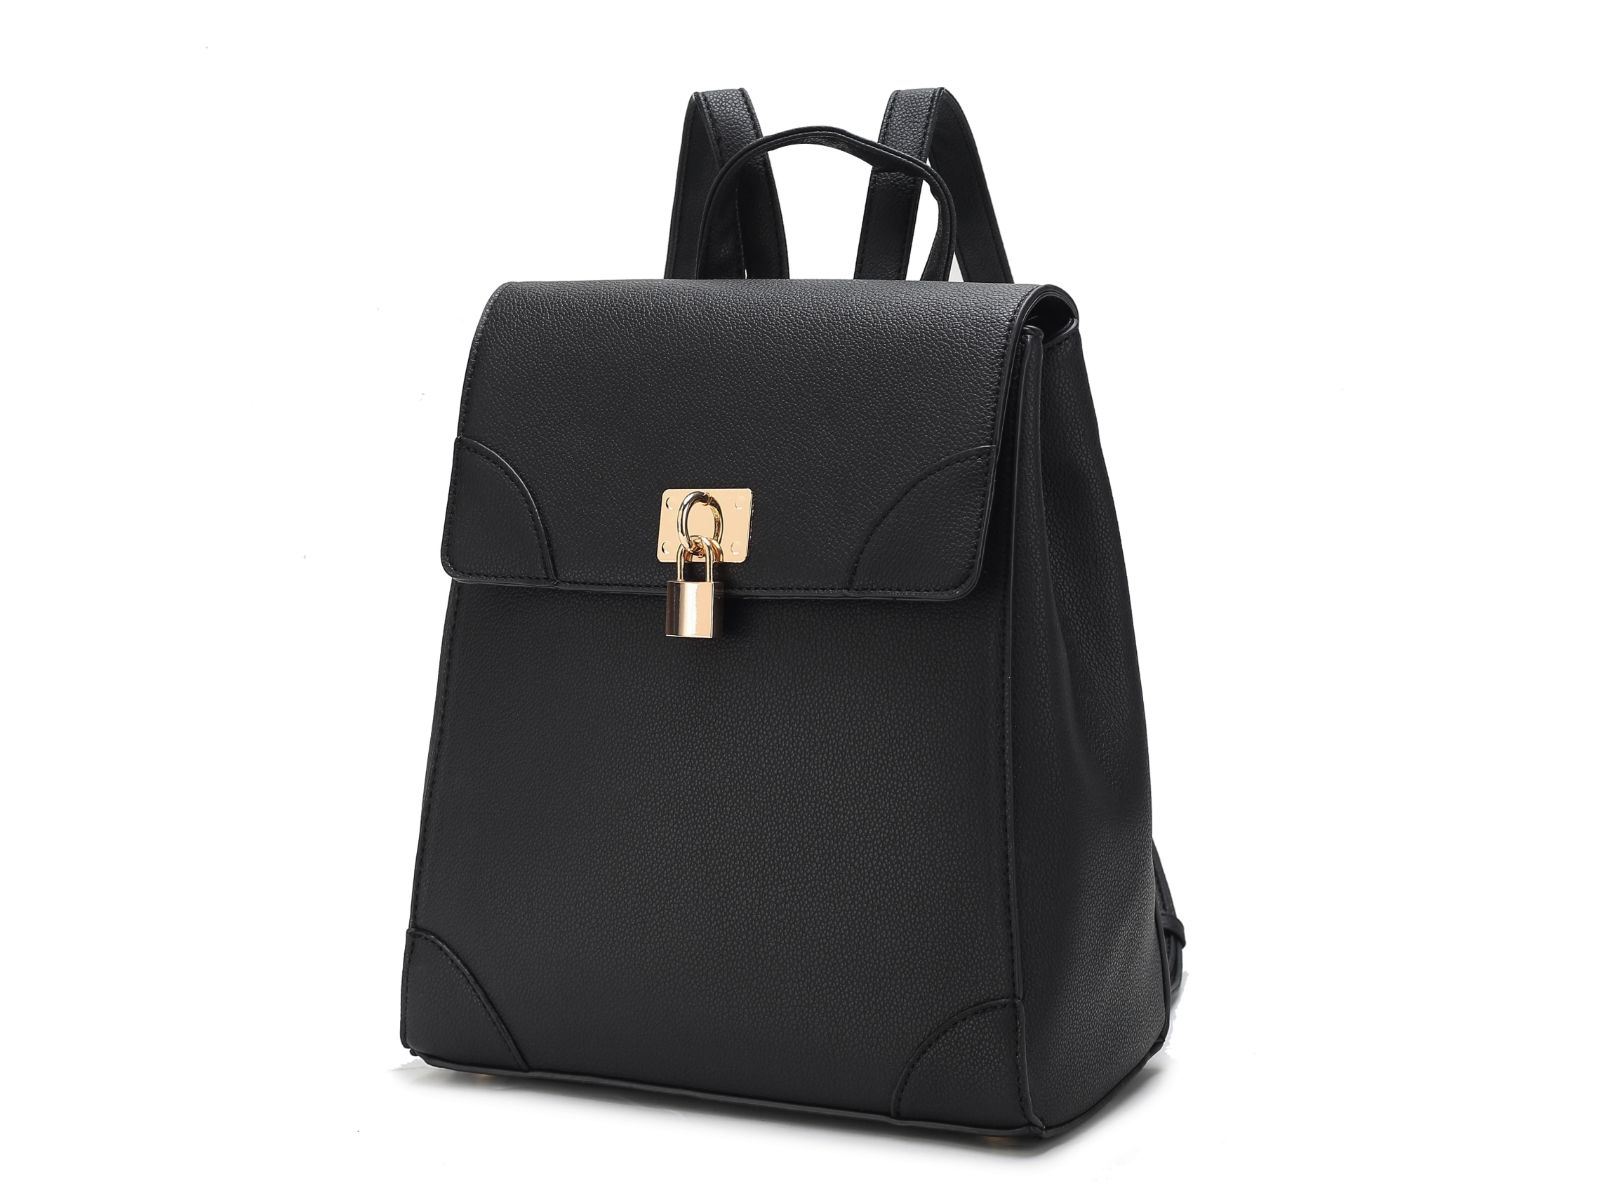 A MKF Collection Sansa Vegan Leather Women's Backpack by Mia k with a gold buckle.